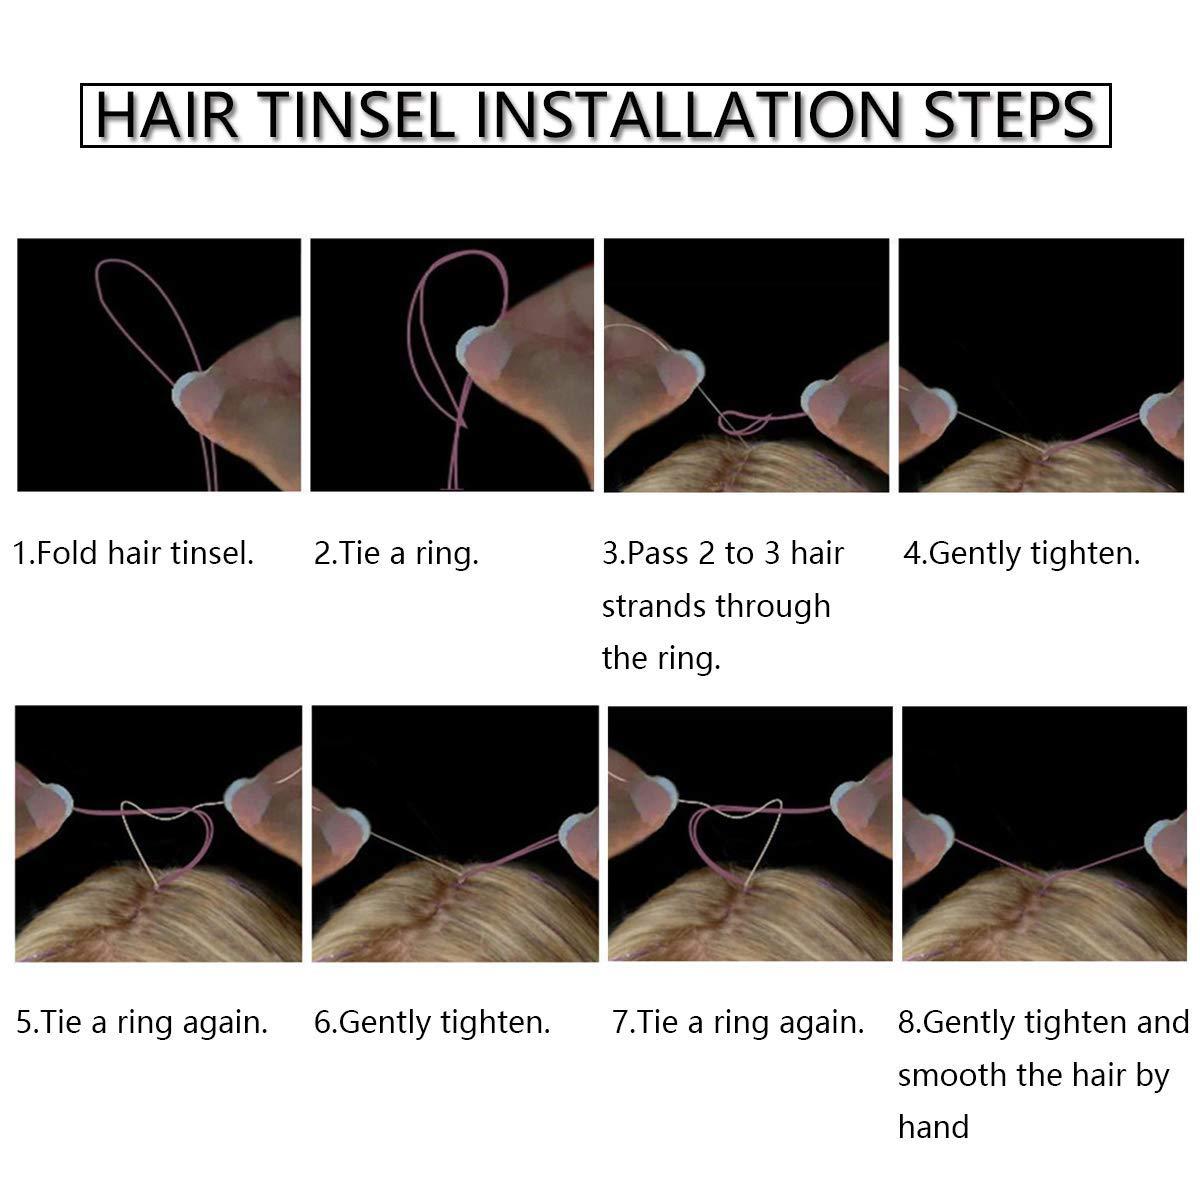 How to Put In Hair Tinsel at Home in 3 Easy Steps